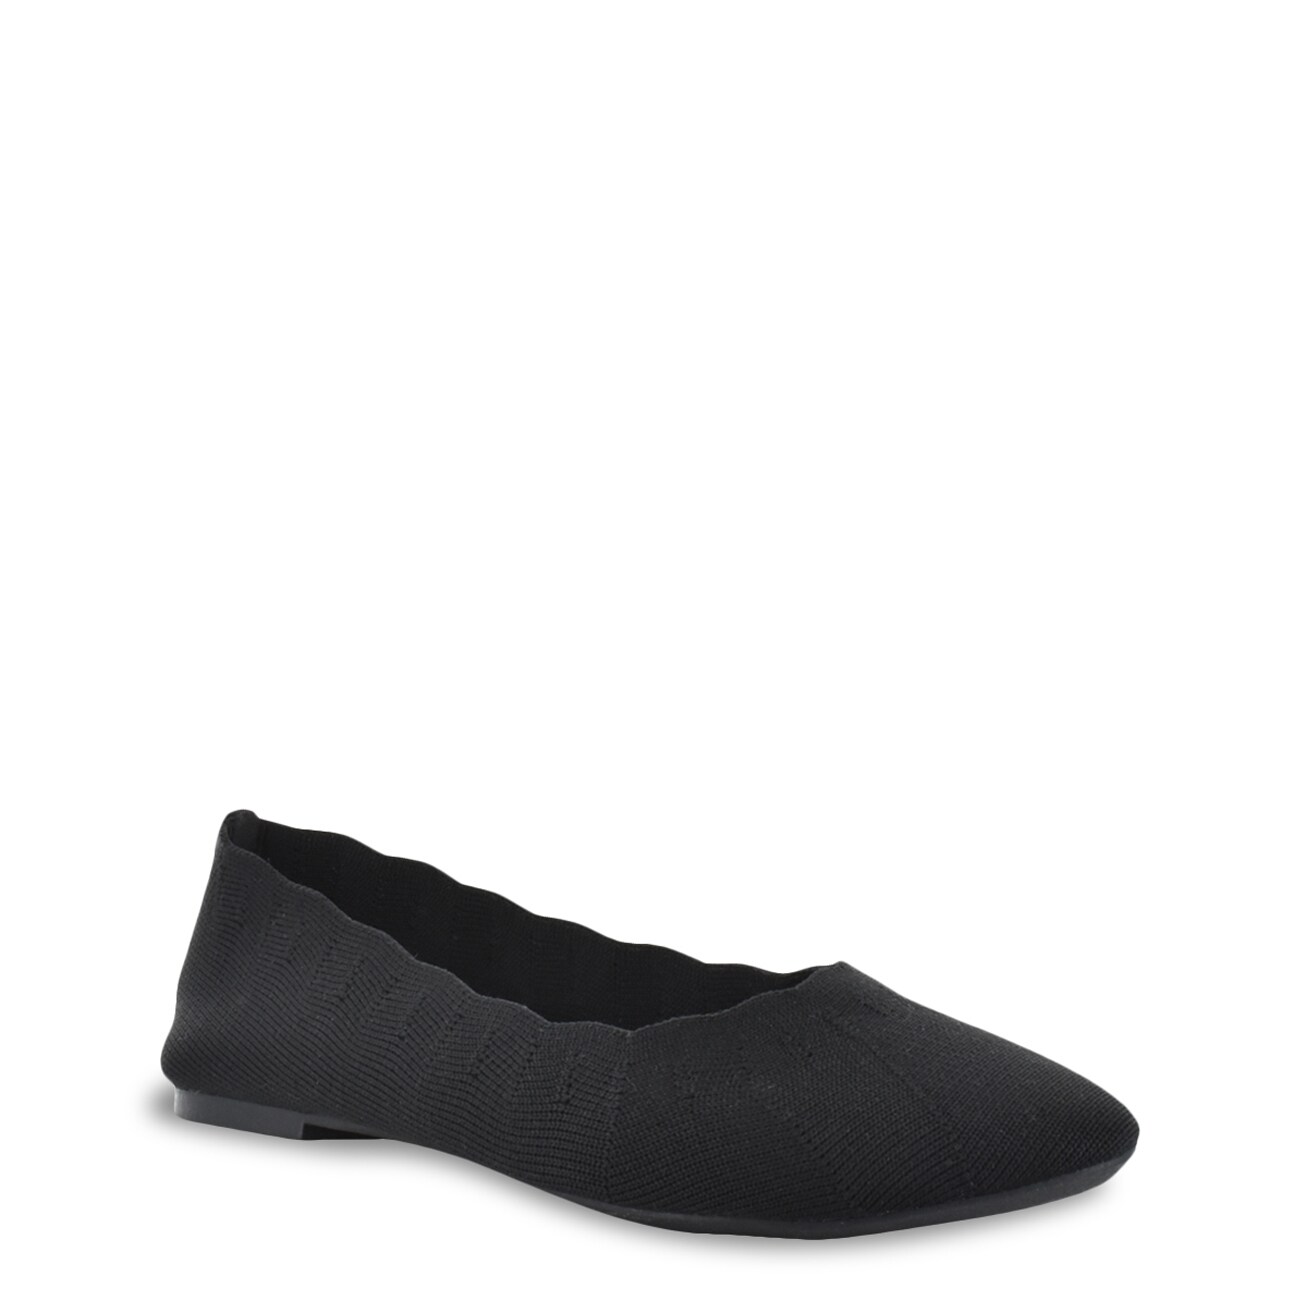 Skechers Women's Cleo - Bewitch | The Shoe Company